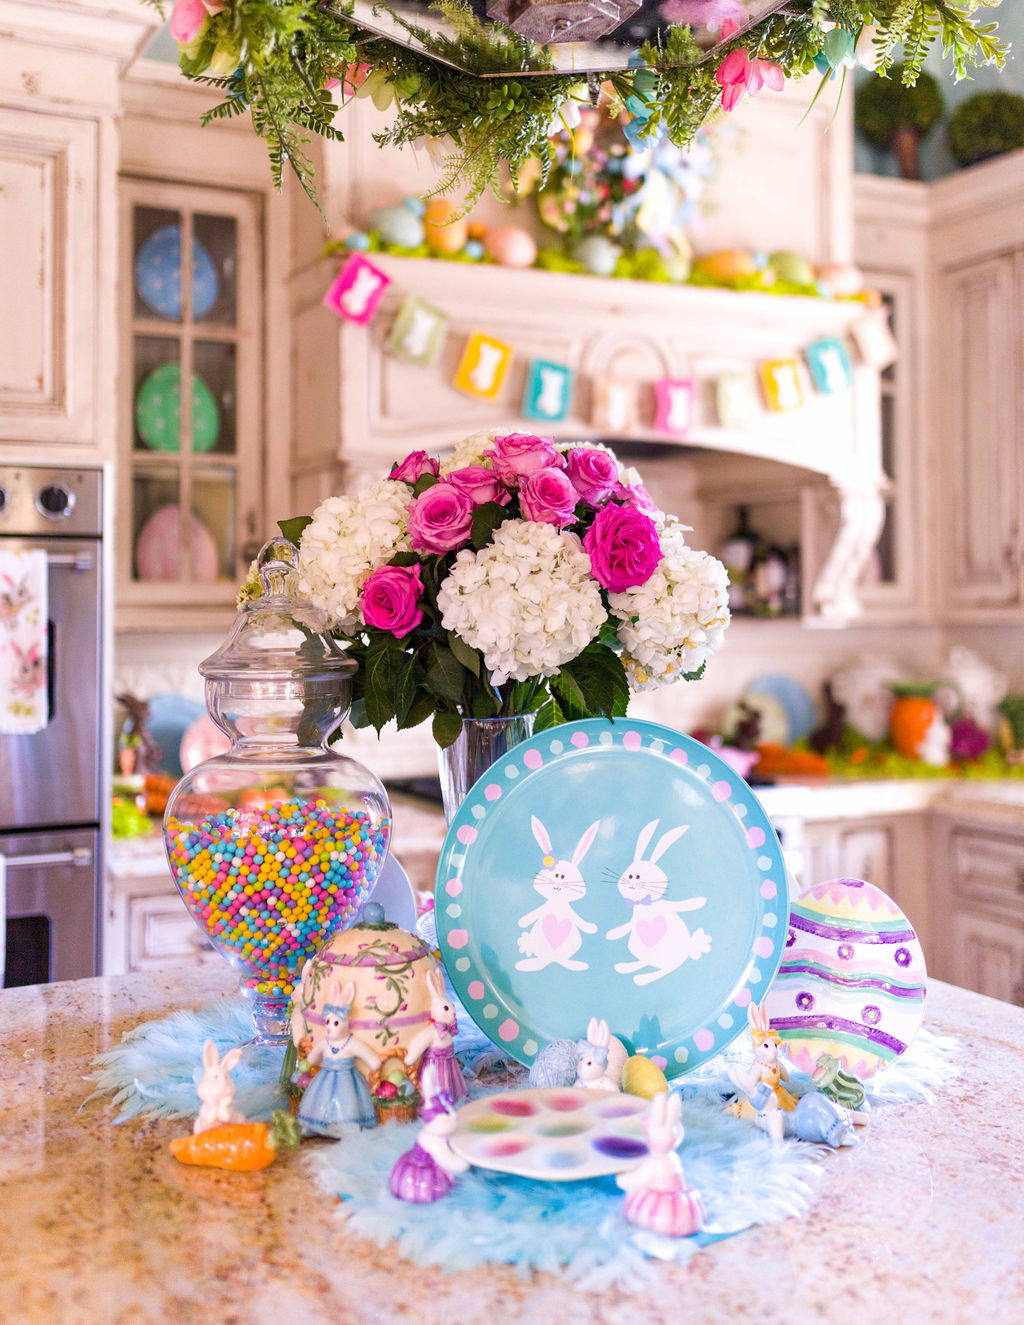 3 easy steps for your Easter kitchen by Turtle Creek Lane